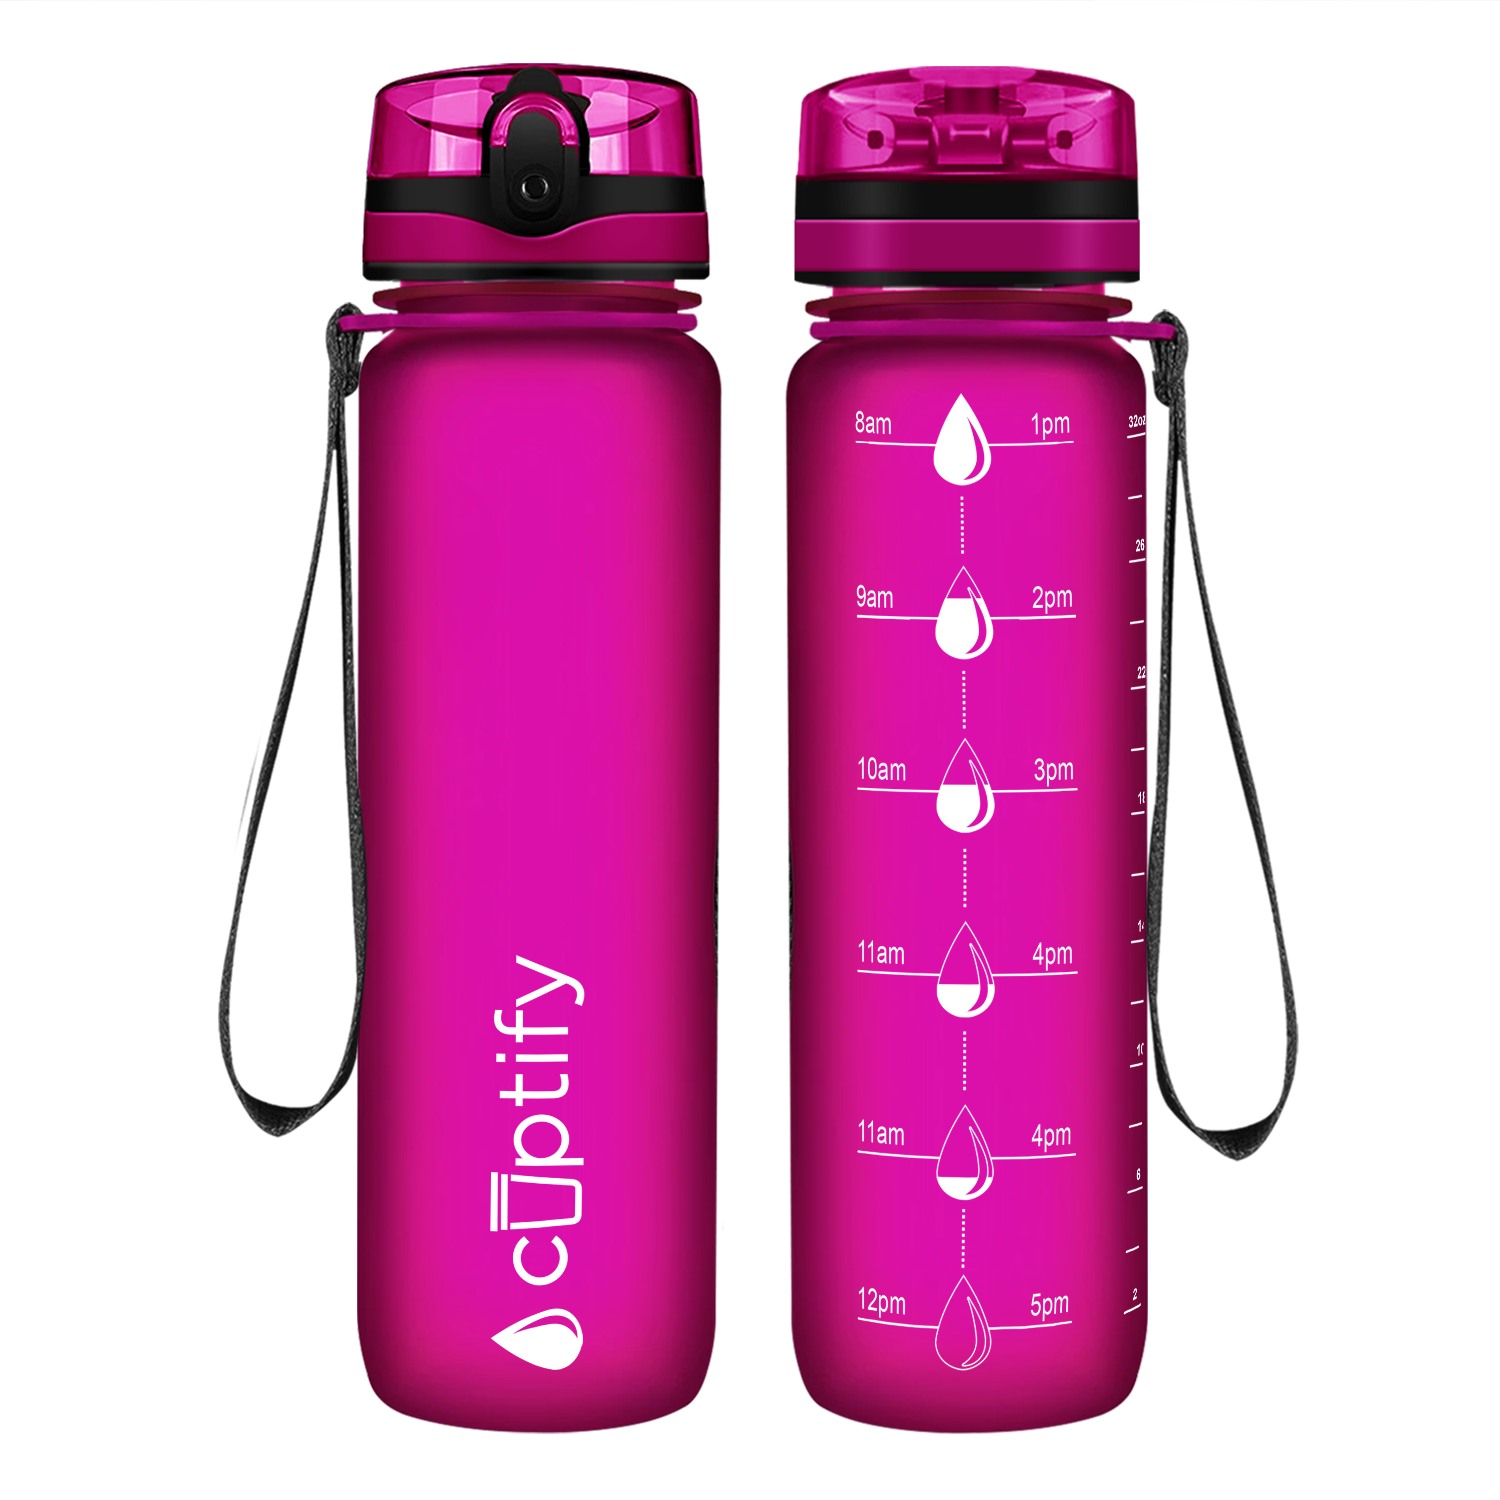 Cuptify Fuchsia Frosted Hydration Tracker Water Bottle